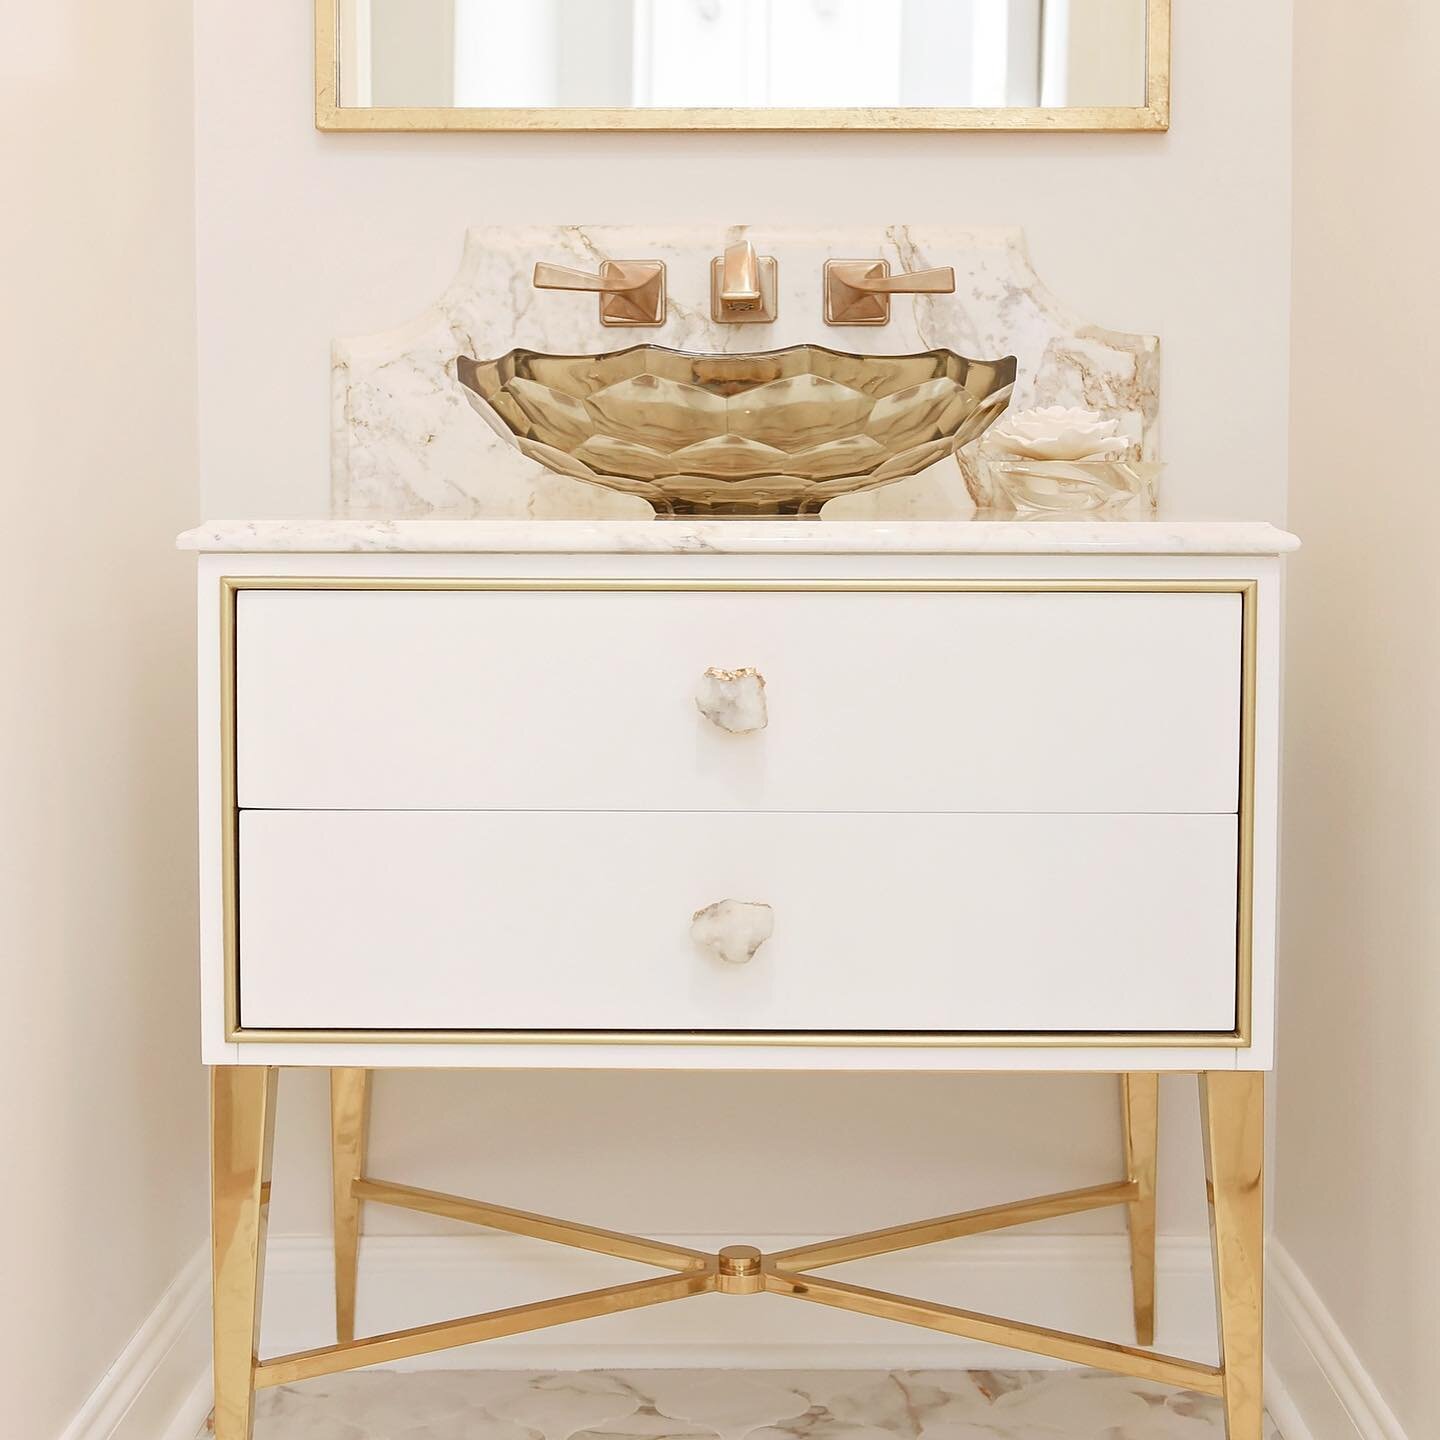 Powder Bathroom Renovation with all the details. From gold marble veining to agate rock knobs, this bathroom is a show-stopping beauty. 

#vanity #agaterockknobs #agaterock #marble #vesselbowl #goldlegs #wallmountfaucet #customizedvanity #interiordes